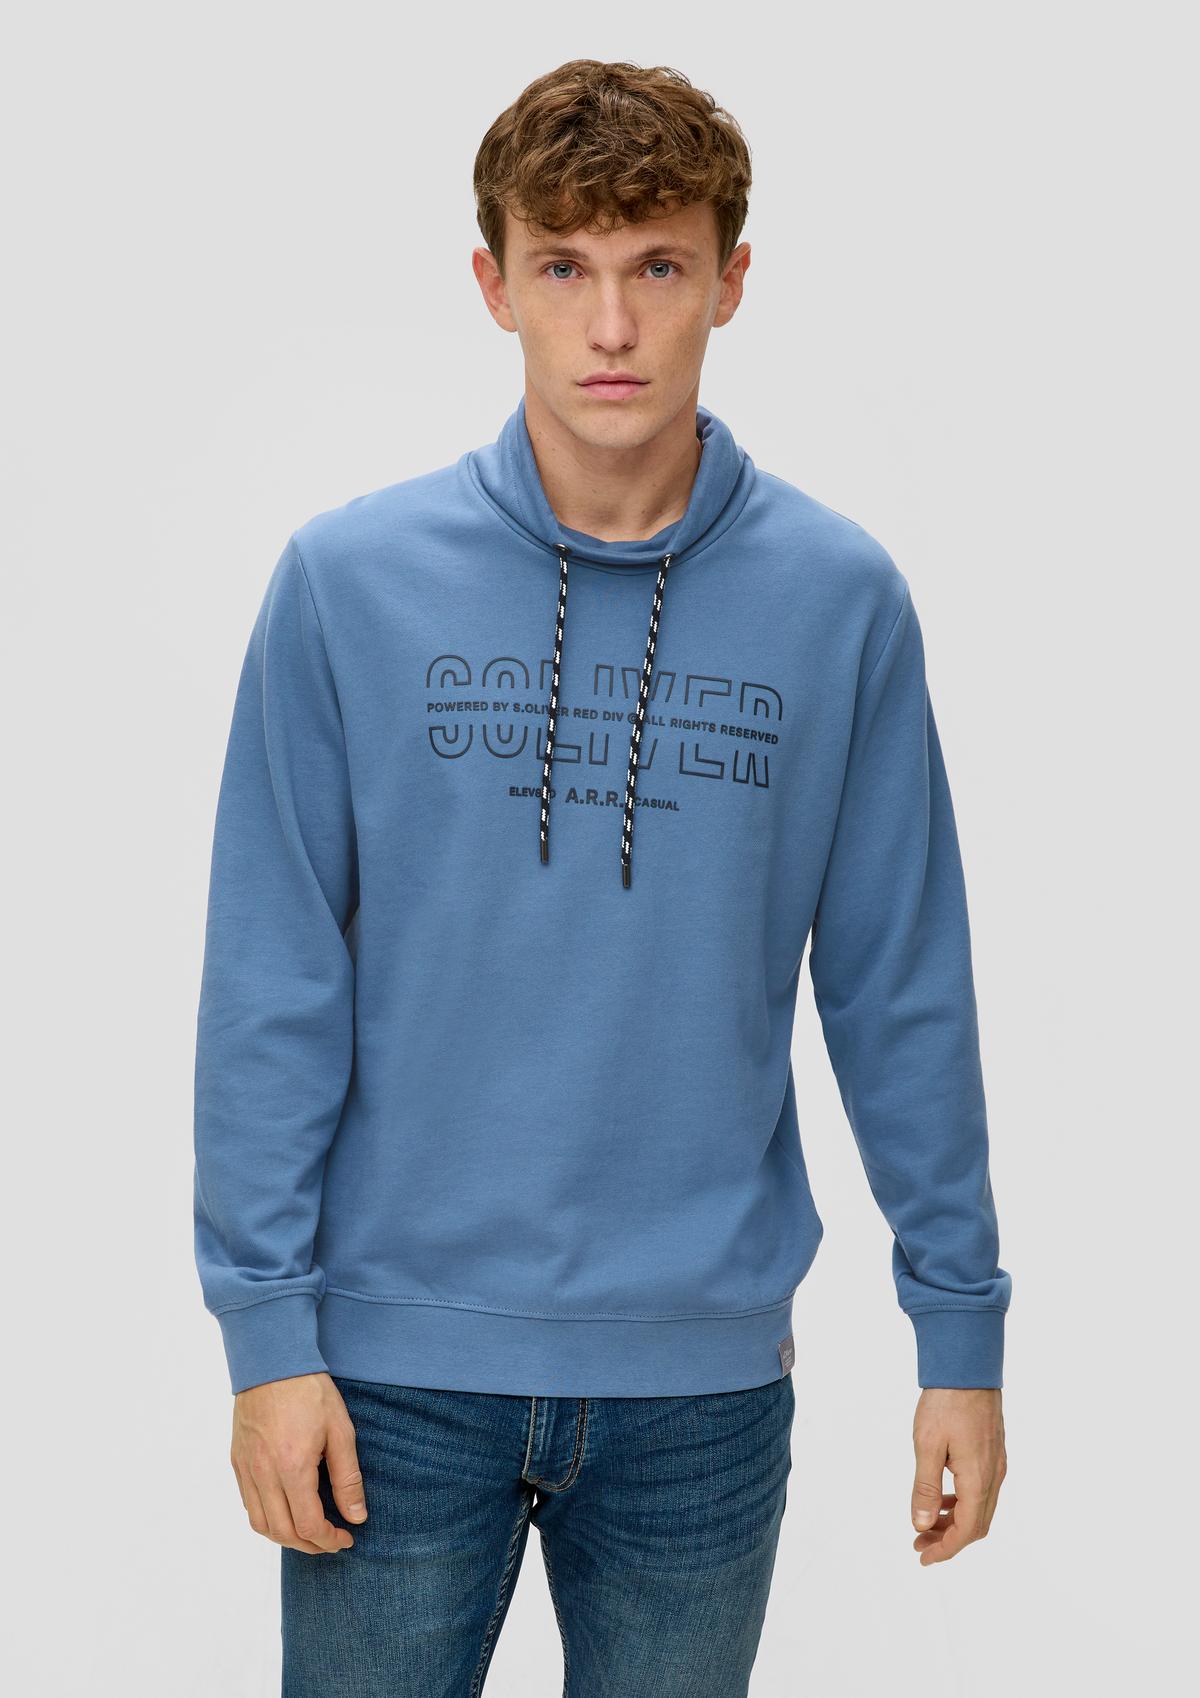 Sweatshirt with a front print - navy